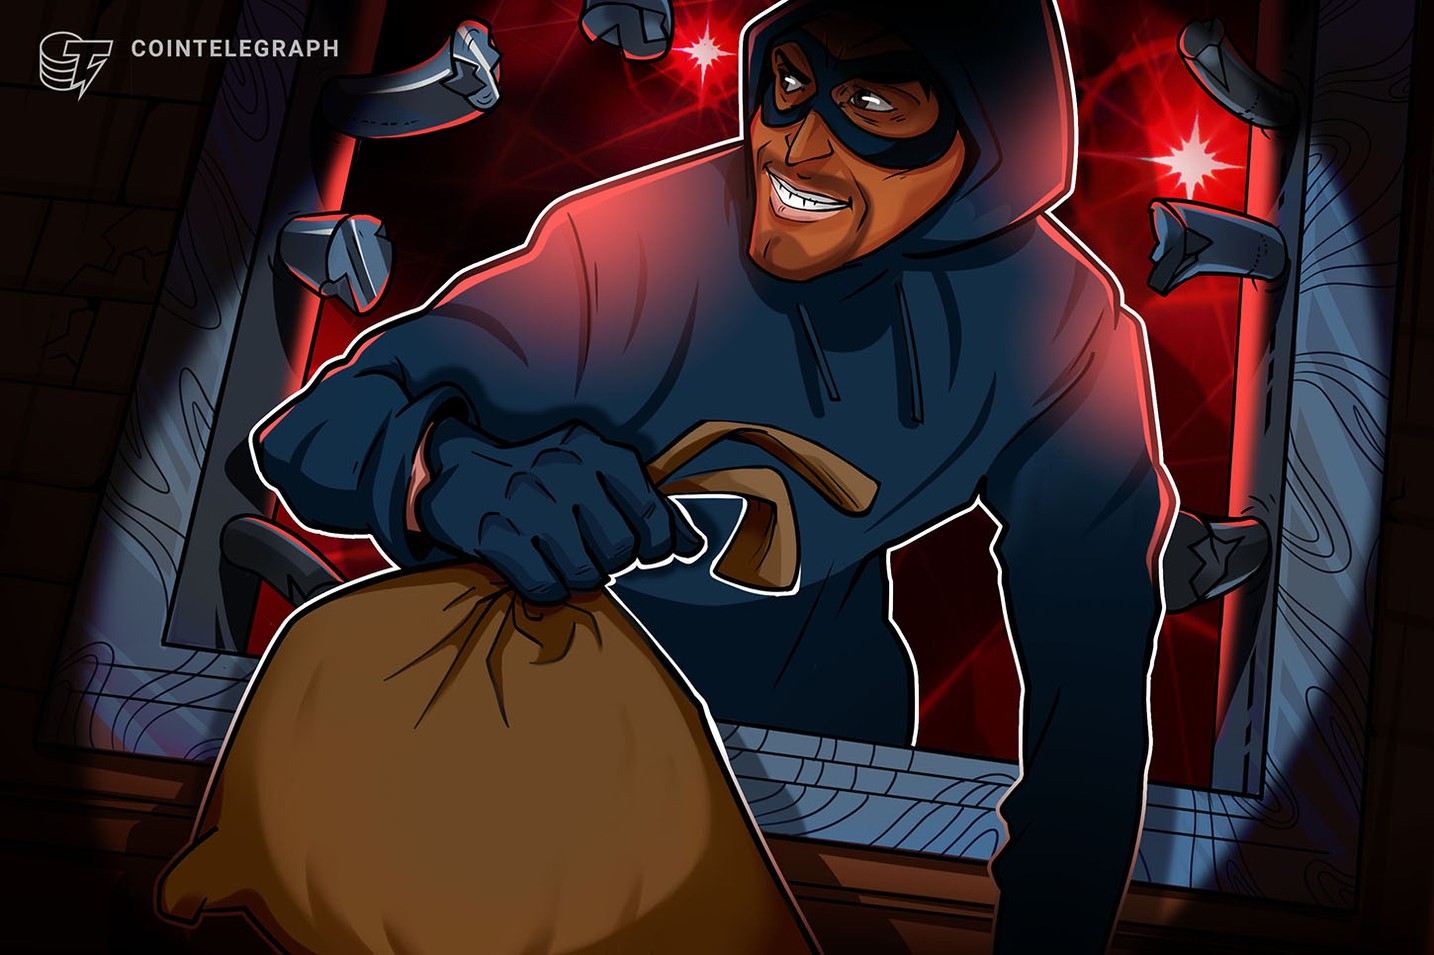 Microsoft's app store infiltrated by fraudulent Ledger Live app, resulting in $588K theft